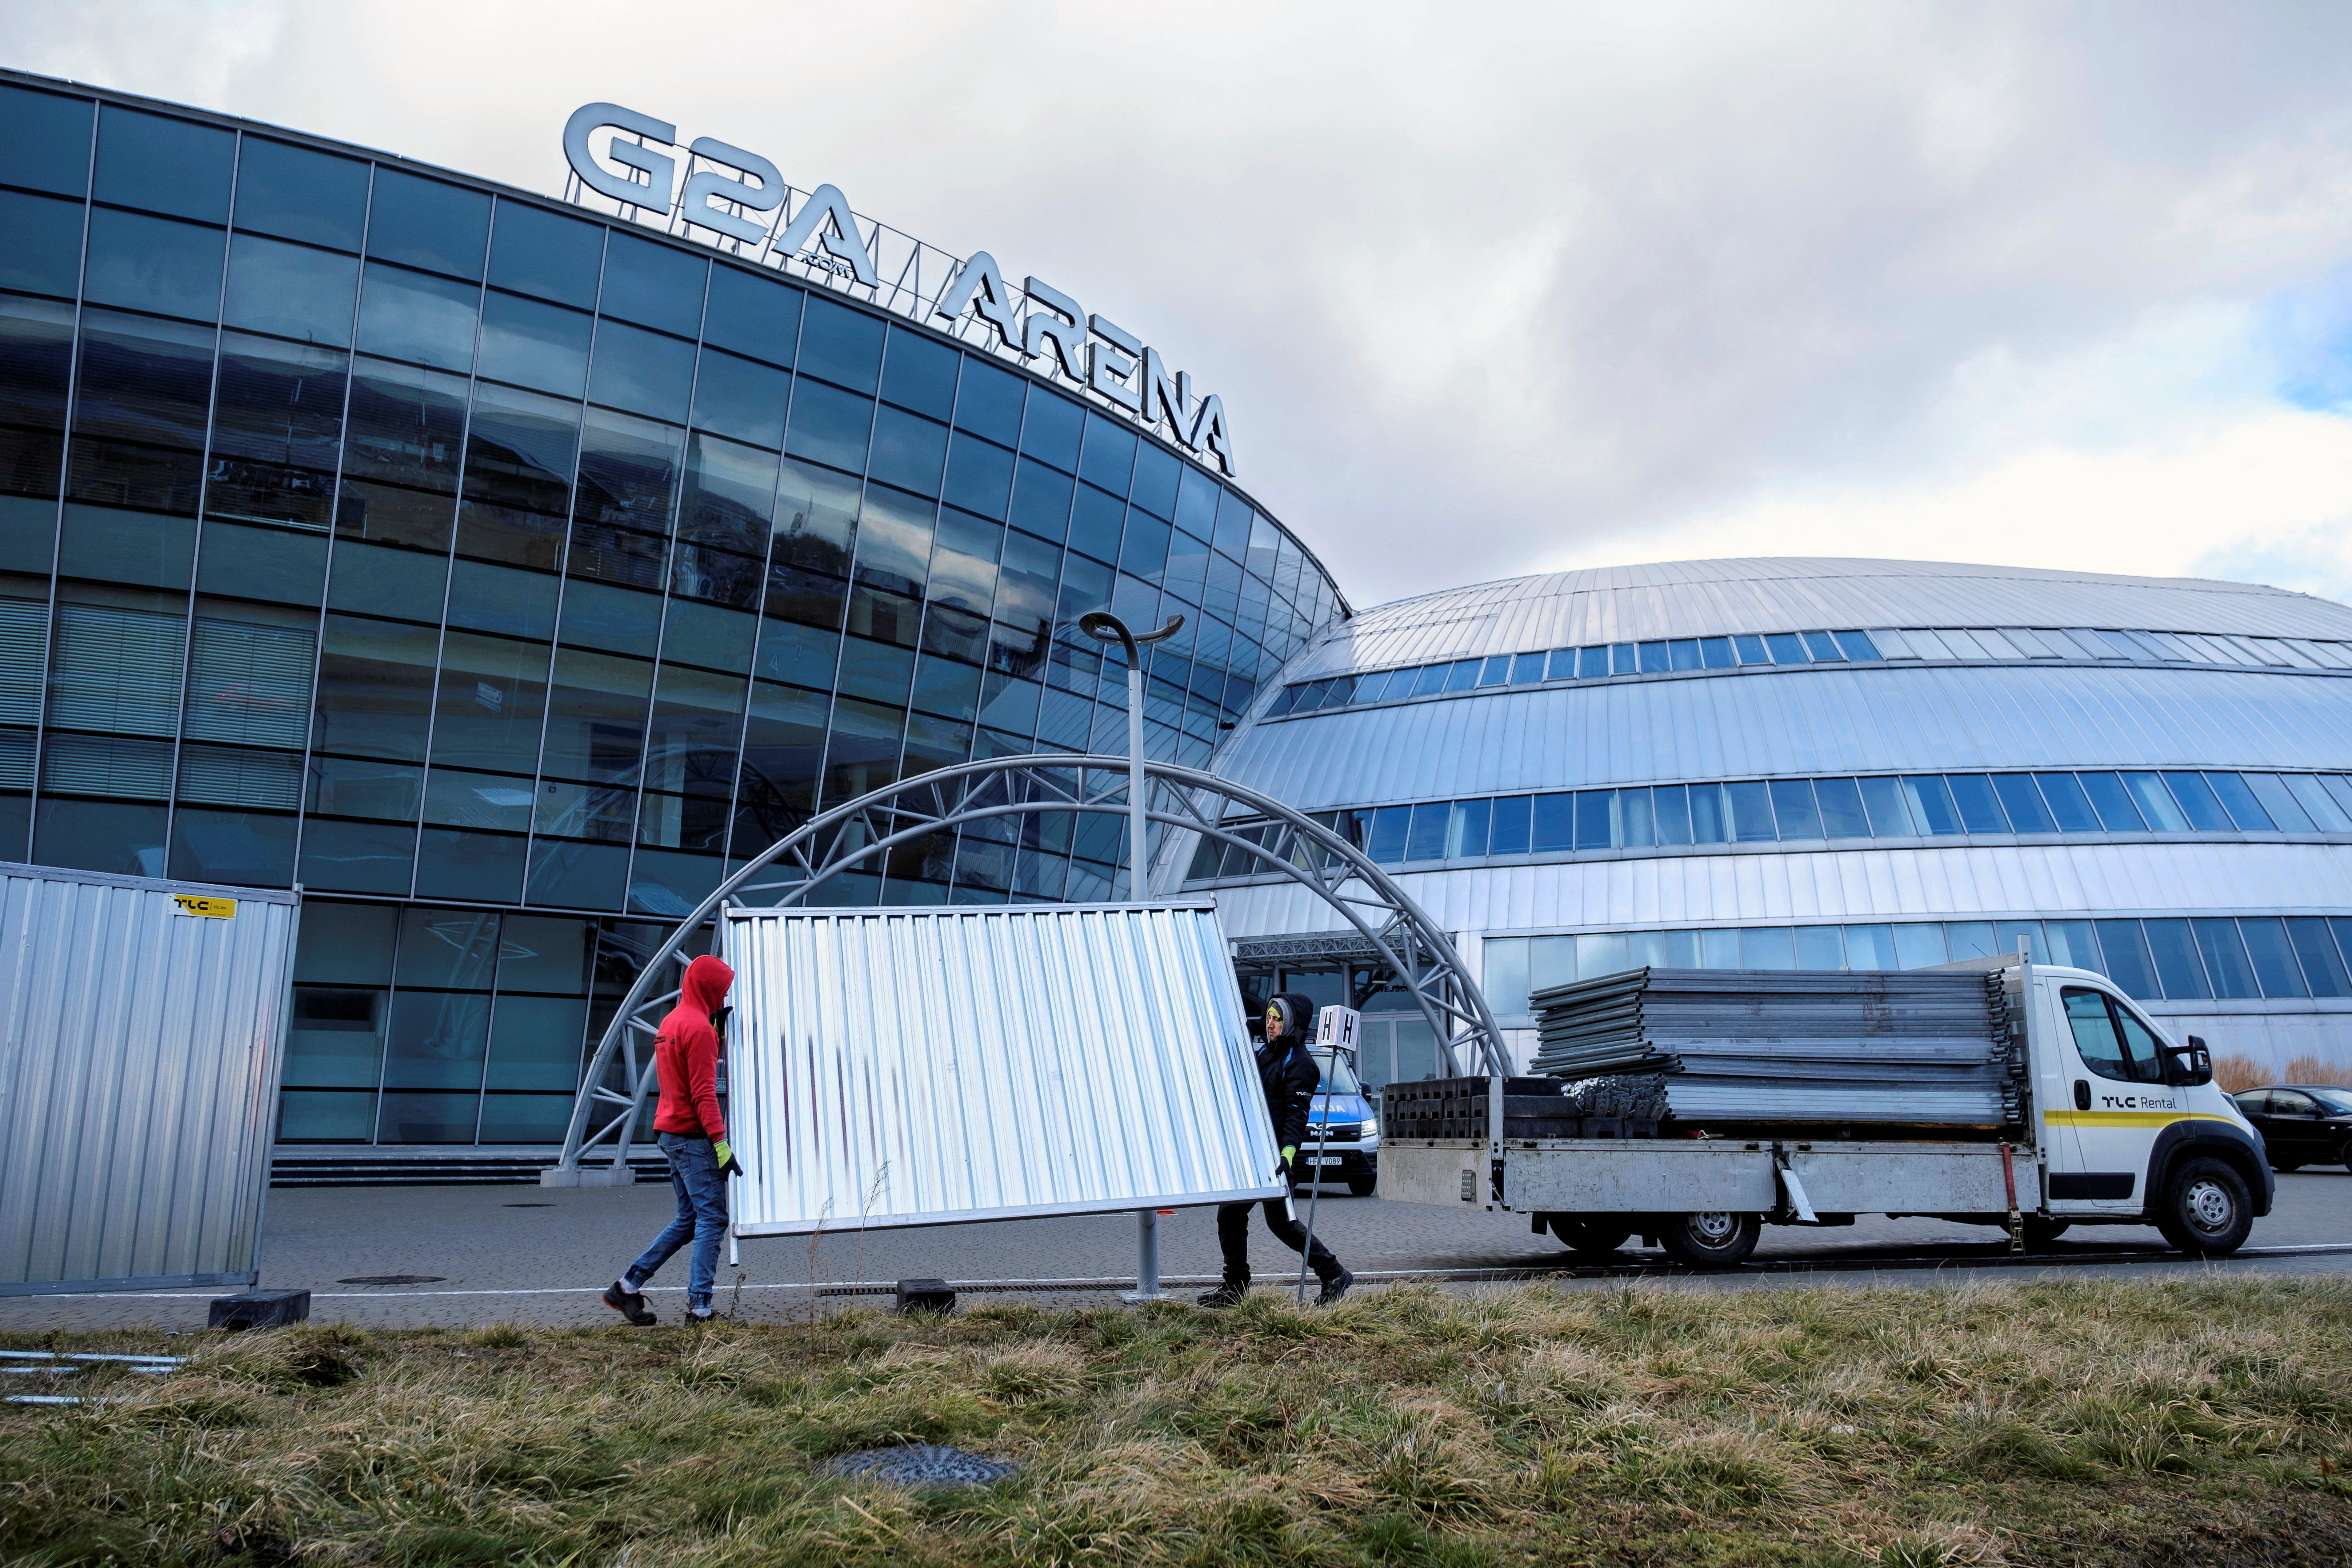 Workers set up metal barriers around the G2A Arena in Jasionka near Rzeszow